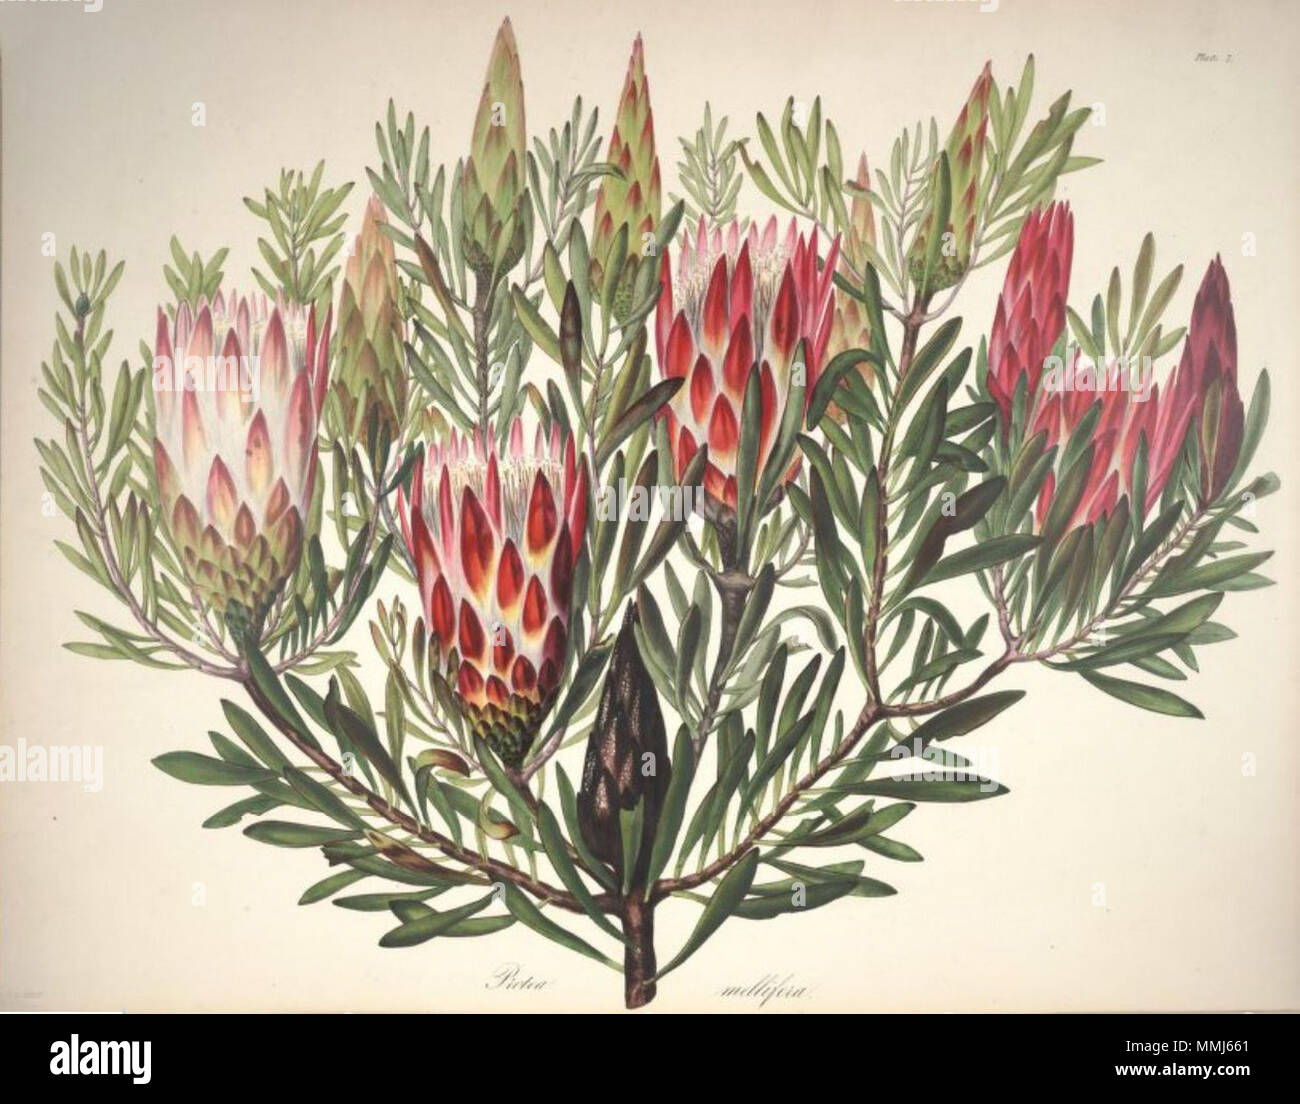 . English: Protea mellifera Thunb. is a synonym of Protea repens L.  . between 1843 and 1844.   Arabella Elizabeth Roupell  (1817–1914)     Alternative names Roupell; Arabella Roupell; Arabella Elizabeth Pigott  Description British-South African botanical illustrator, painter and botanist  Date of birth/death 23 March 1817 31 July 1914  Location of birth Newport  Authority control  : Q4783330 VIAF:?15525826 Botanist:?Roupell GND:?116664444 54 Arabella Elizabeth Roupell07 Stock Photo